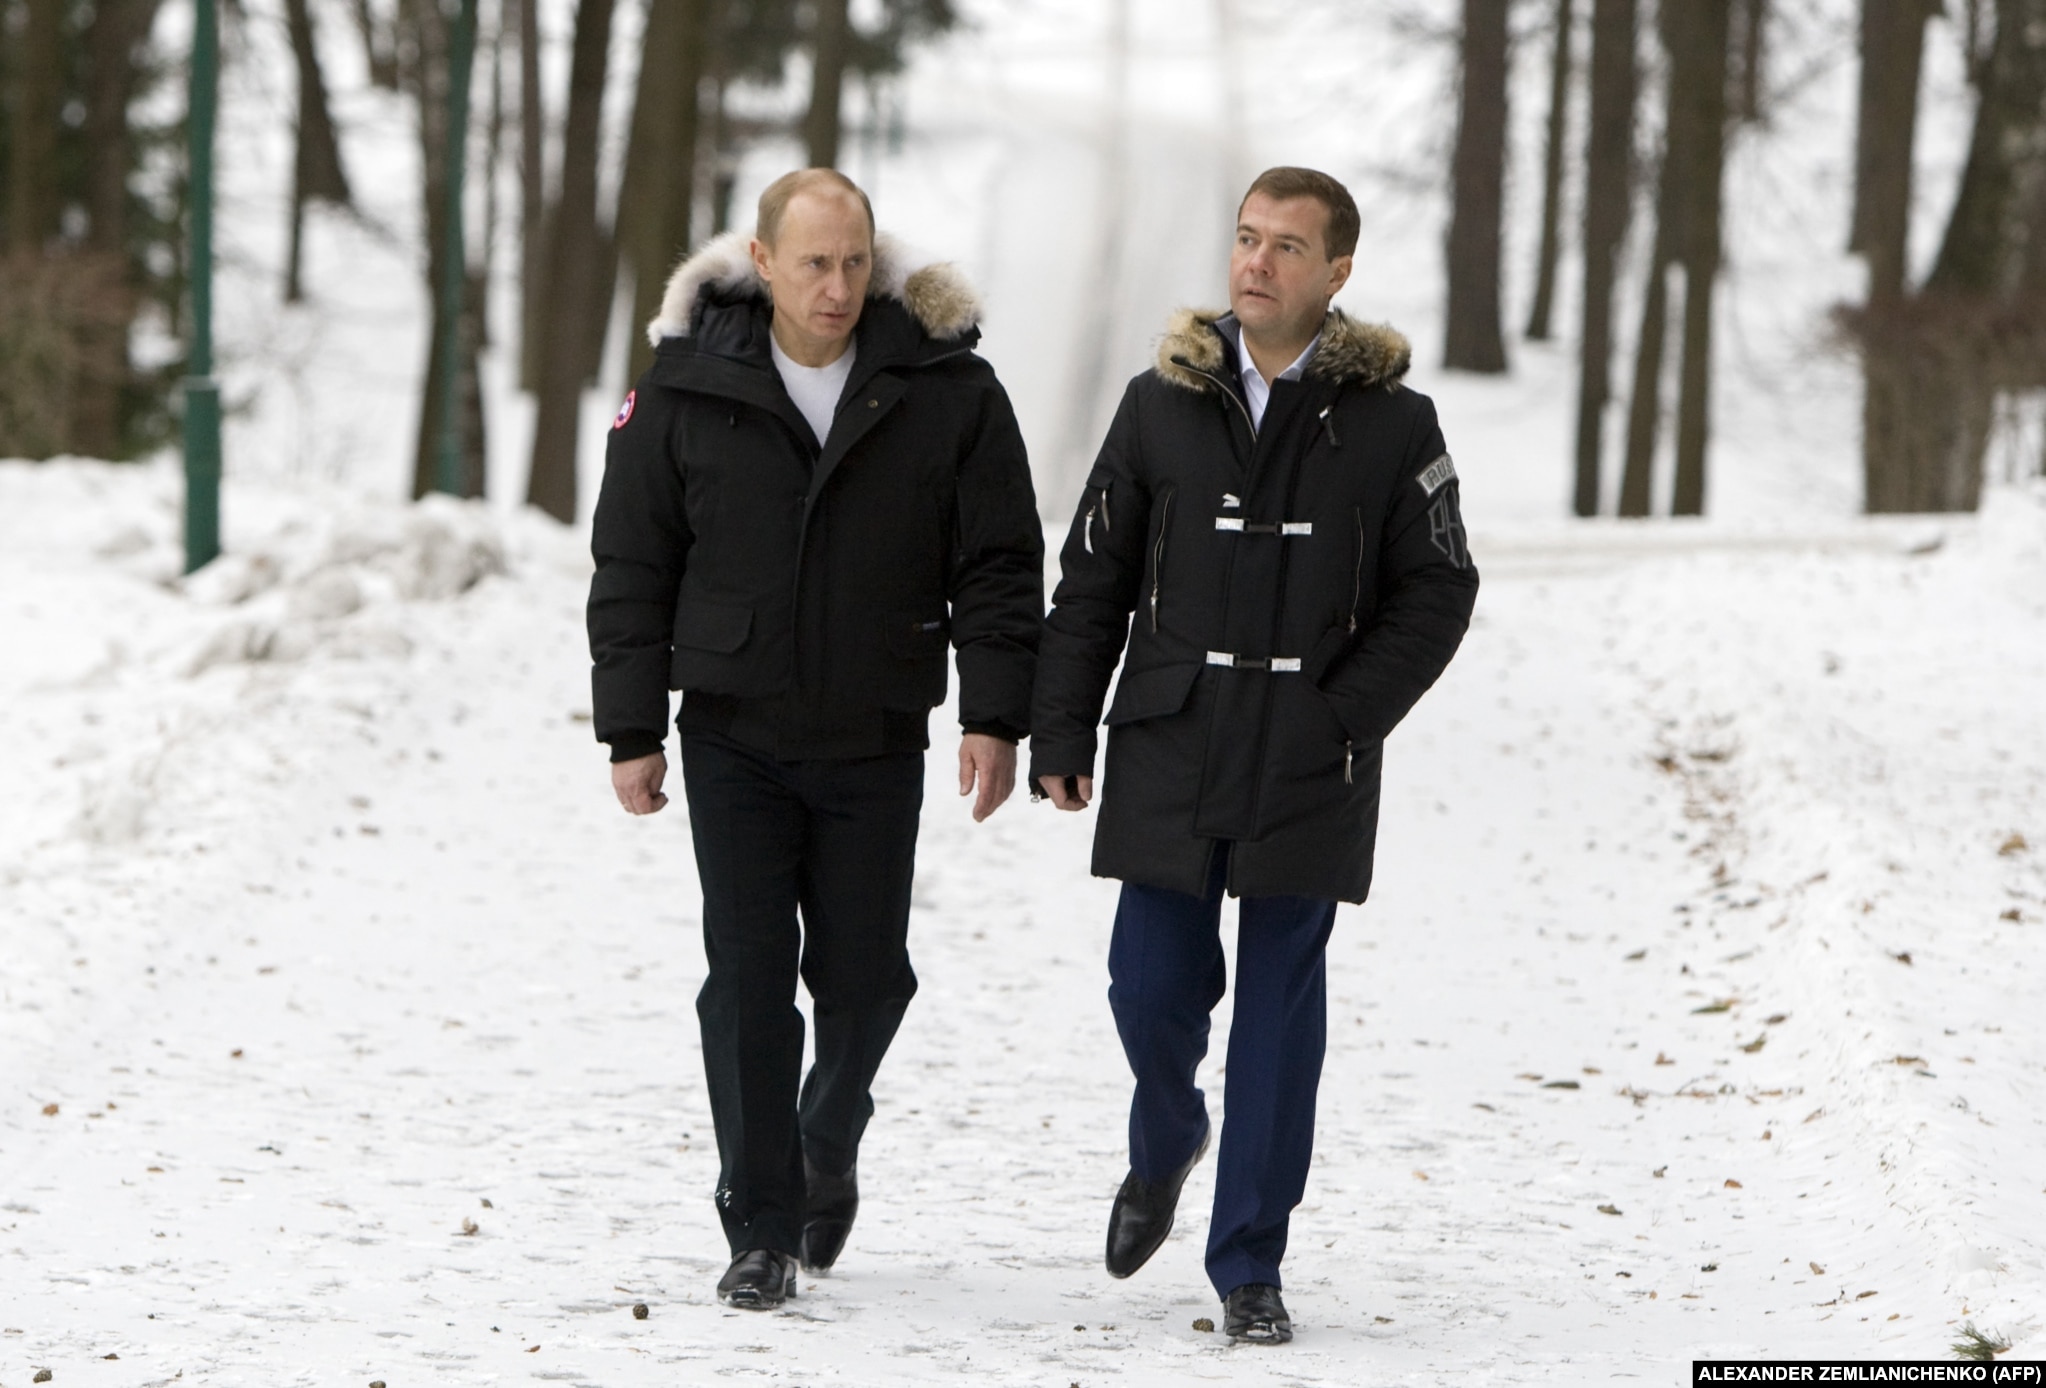 Putin and Medvedev walk outside Moscow on February 29, 2008. When a two-term limit prevented Putin from running for president again in 2008, he named Medvedev, then first deputy prime minister, as his preferred successor.